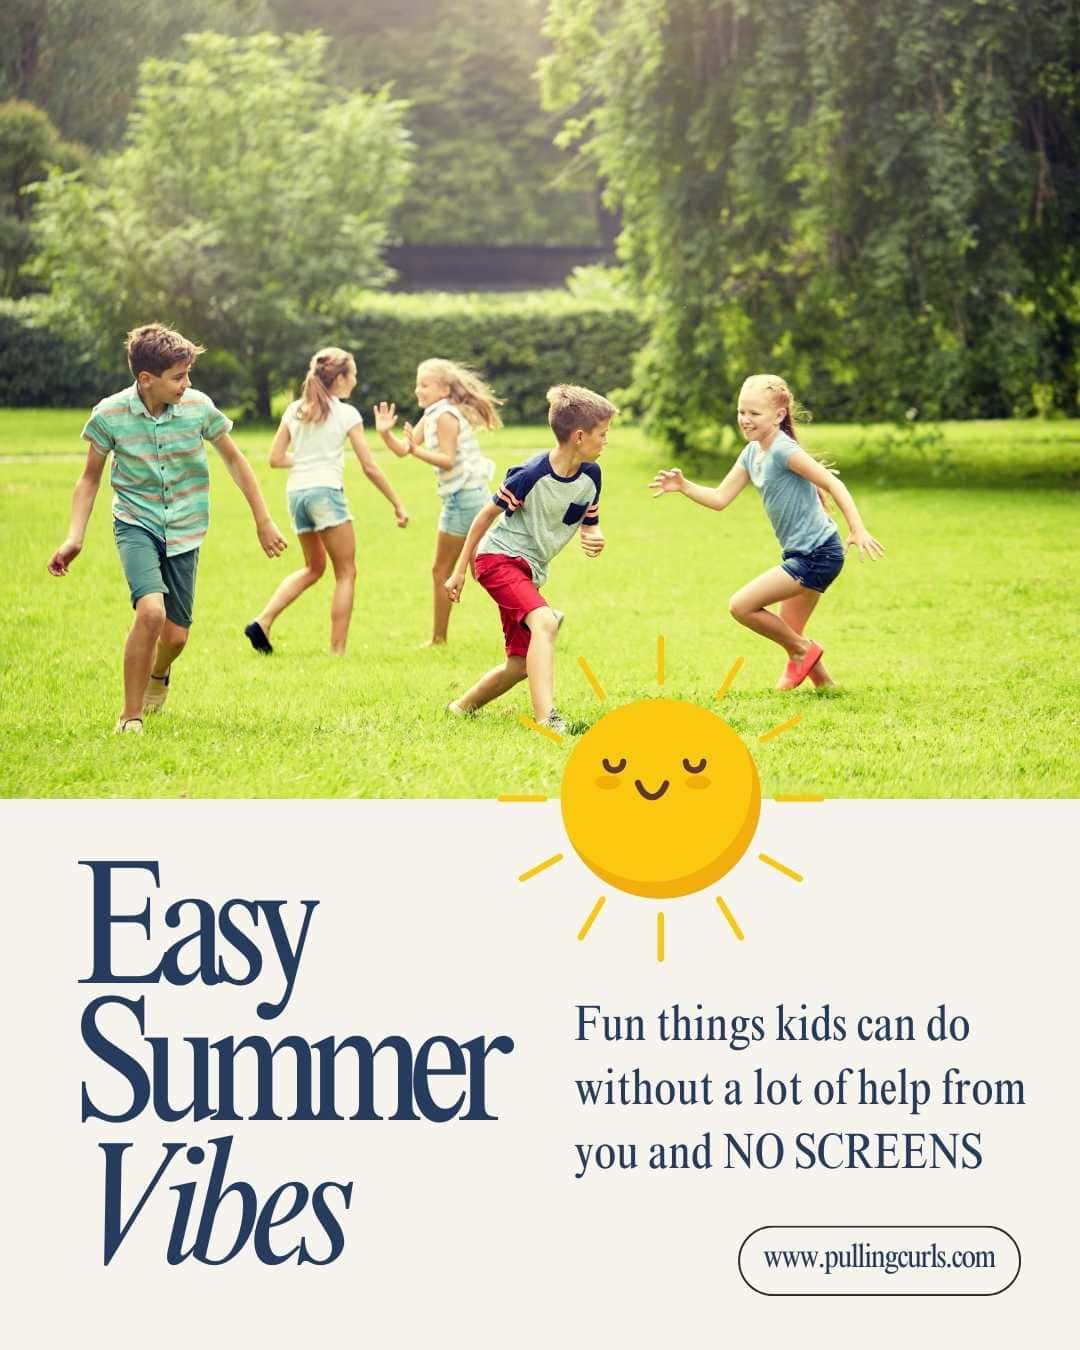 kids playing, a sun, easy summer vibers -- fun things kids can do without a lot of help from you and NO SCREENS via @pullingcurls